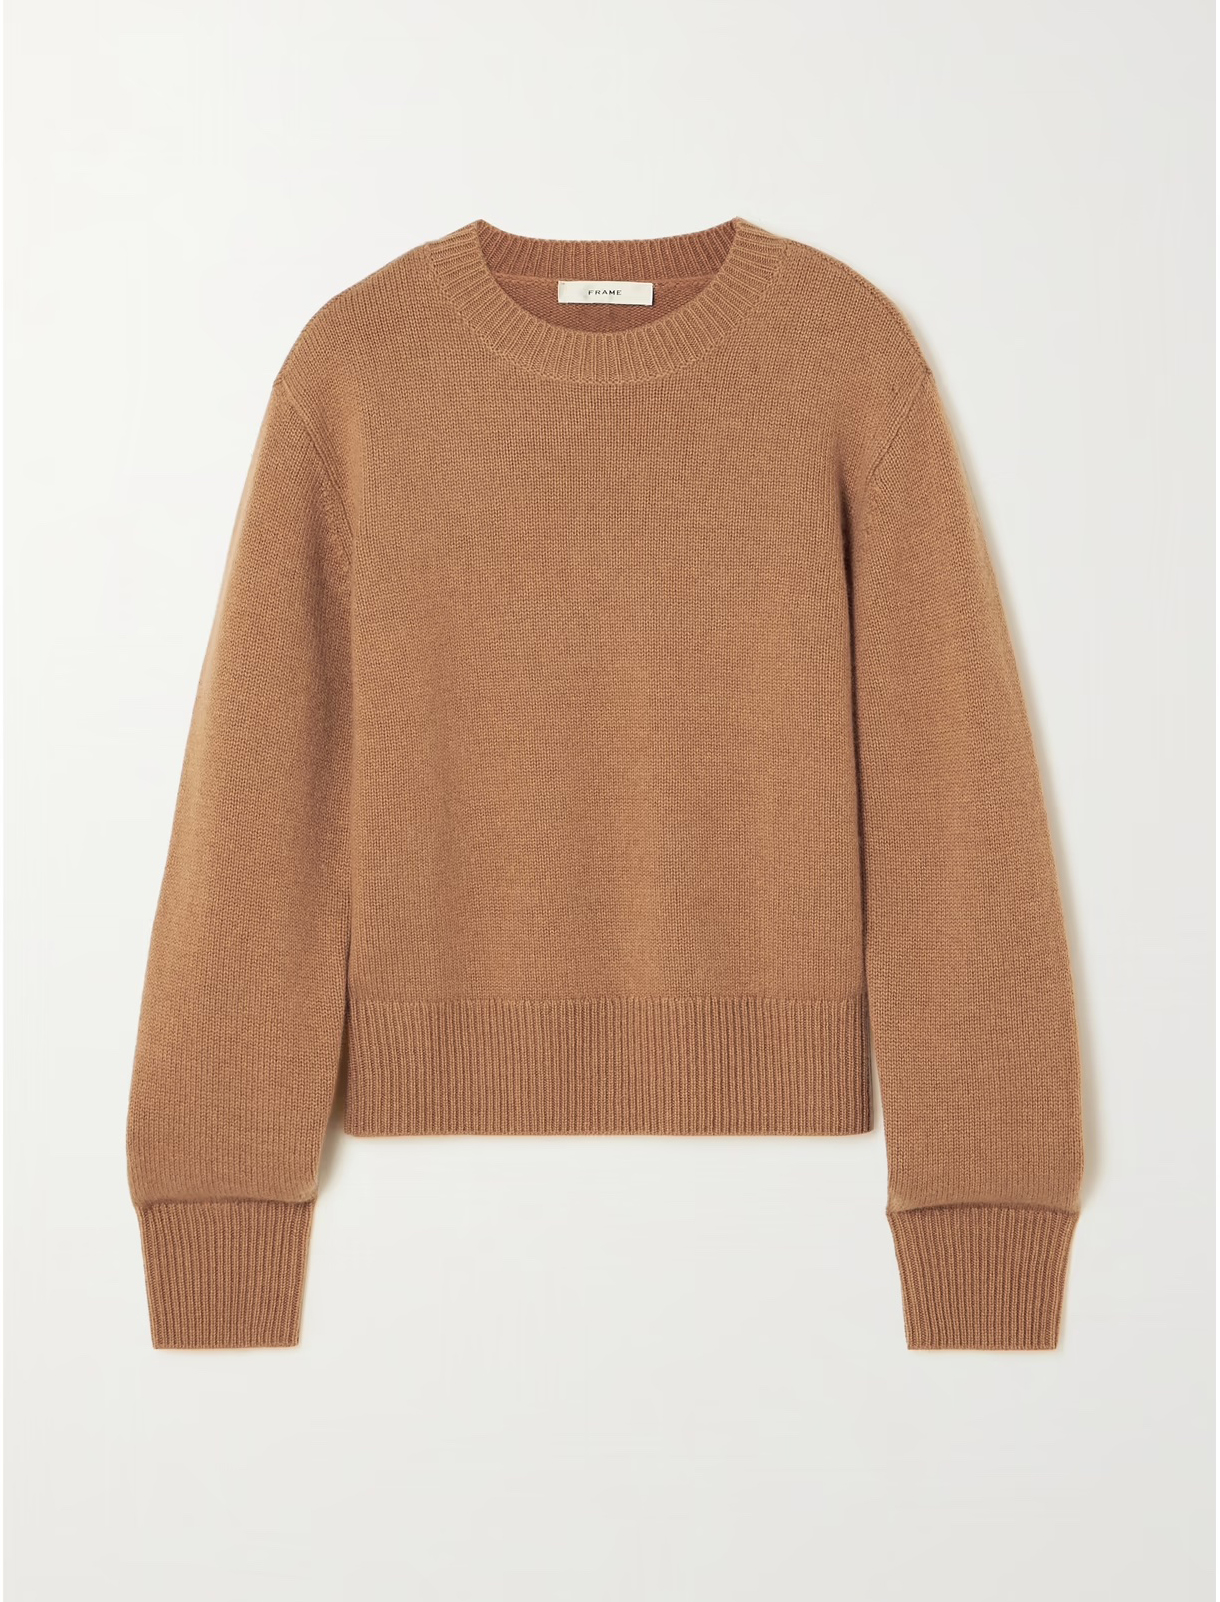 FRAME cashmere sweater